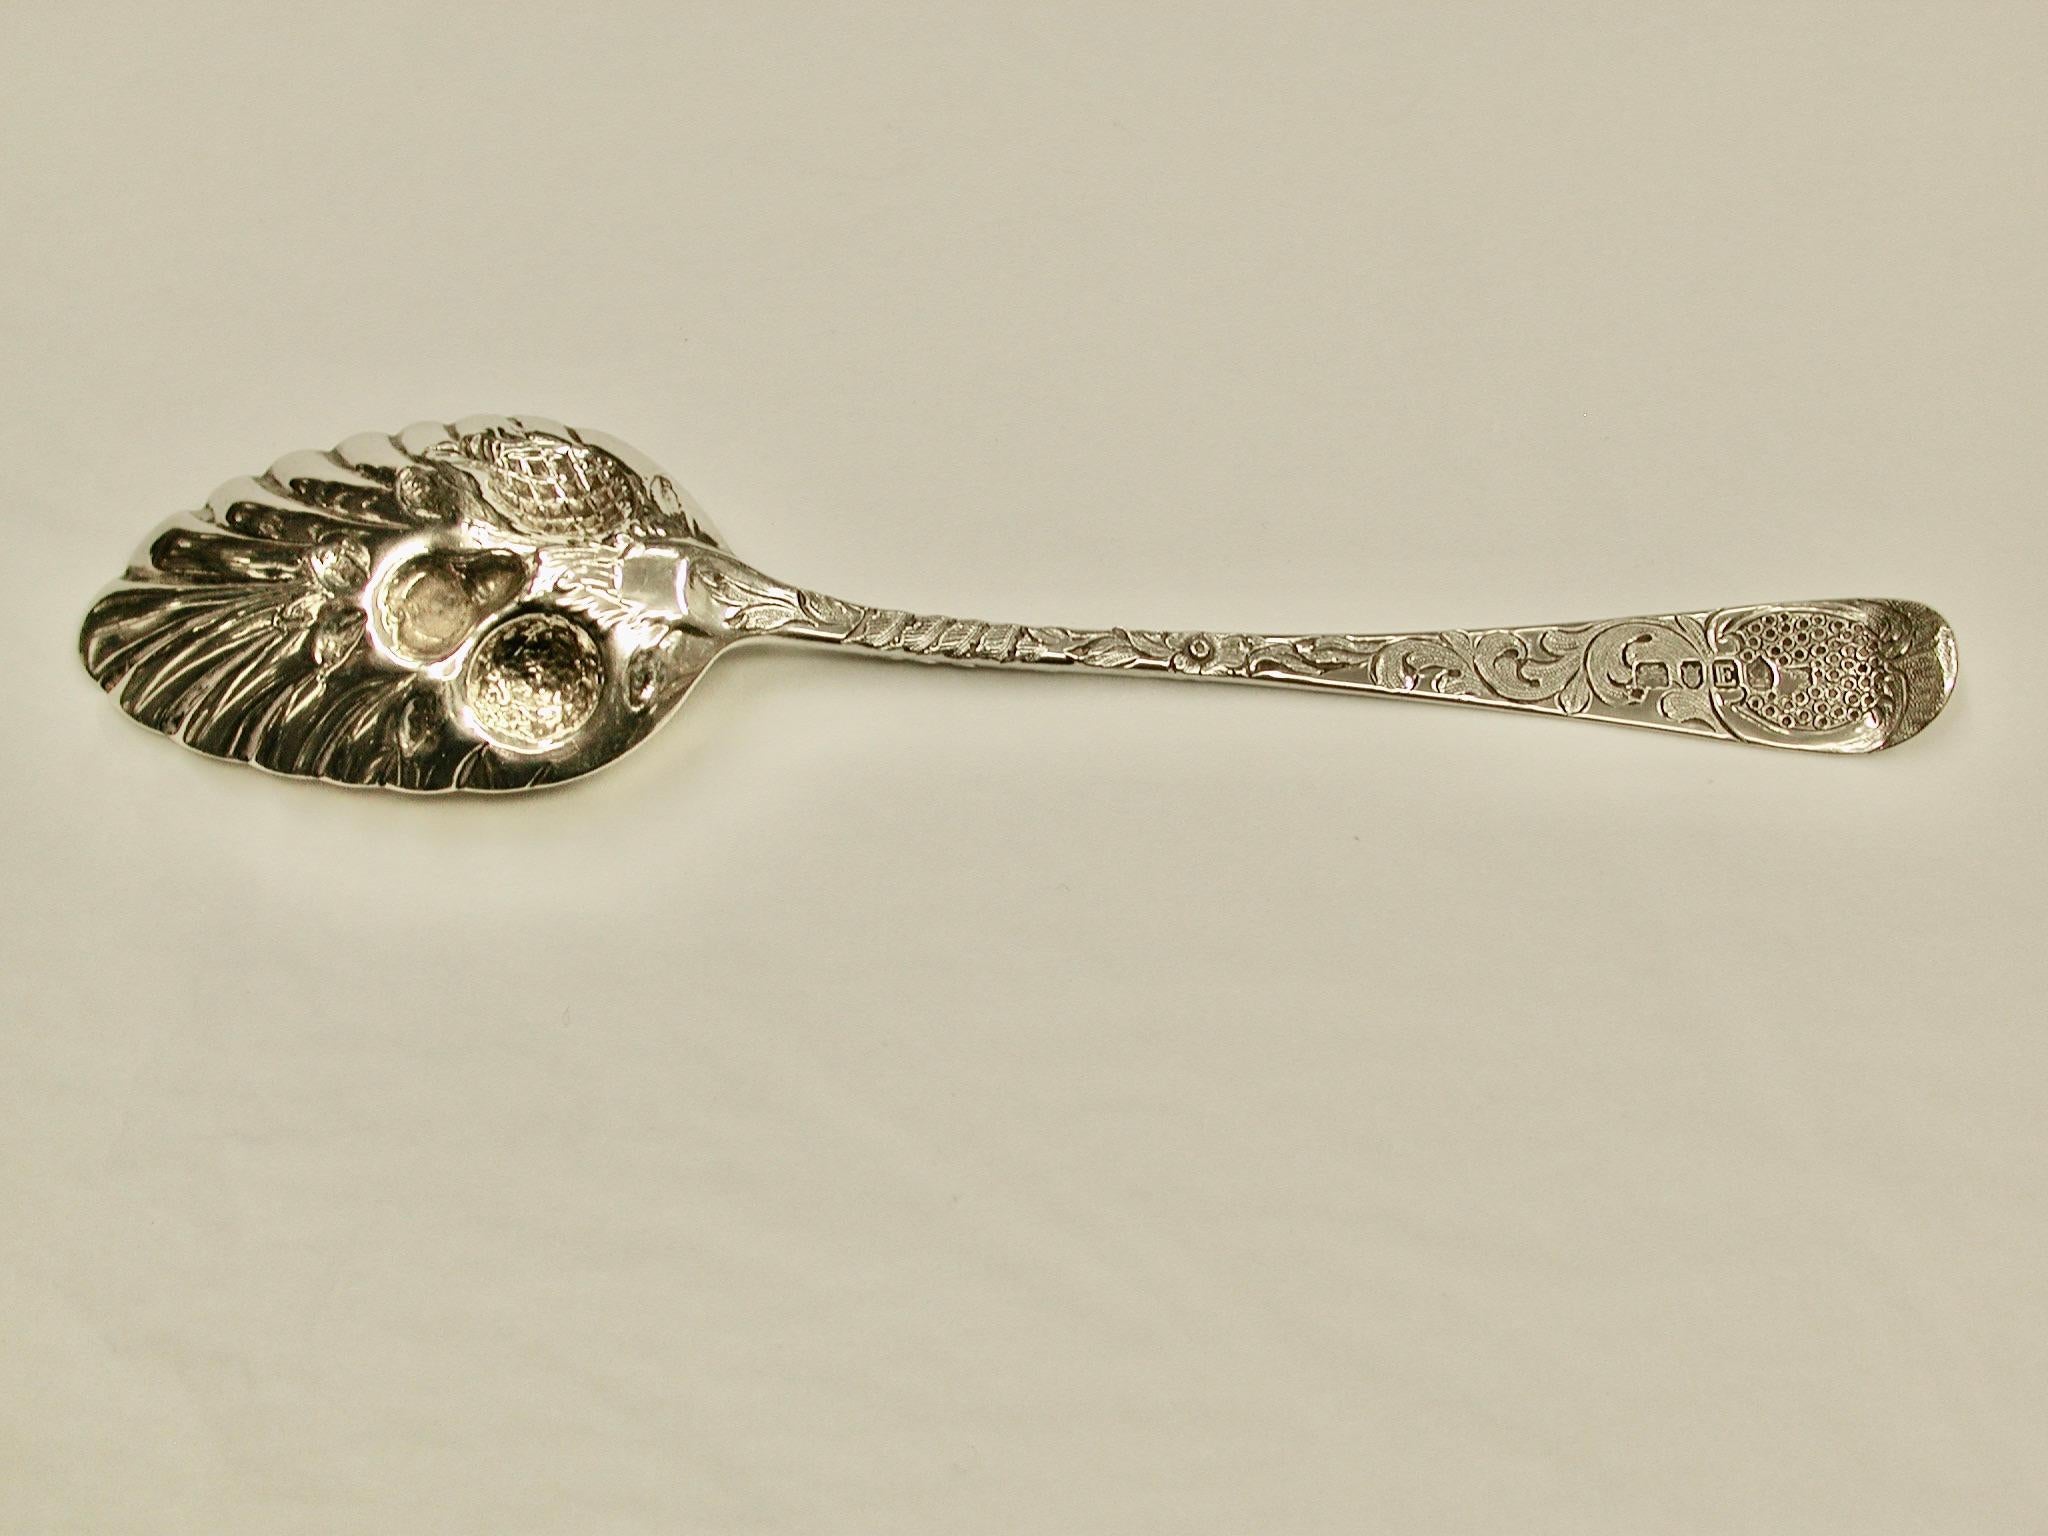 English Pair of George 111 Silver Berry Spoons Dated 1800, Richard Crossley London Assay